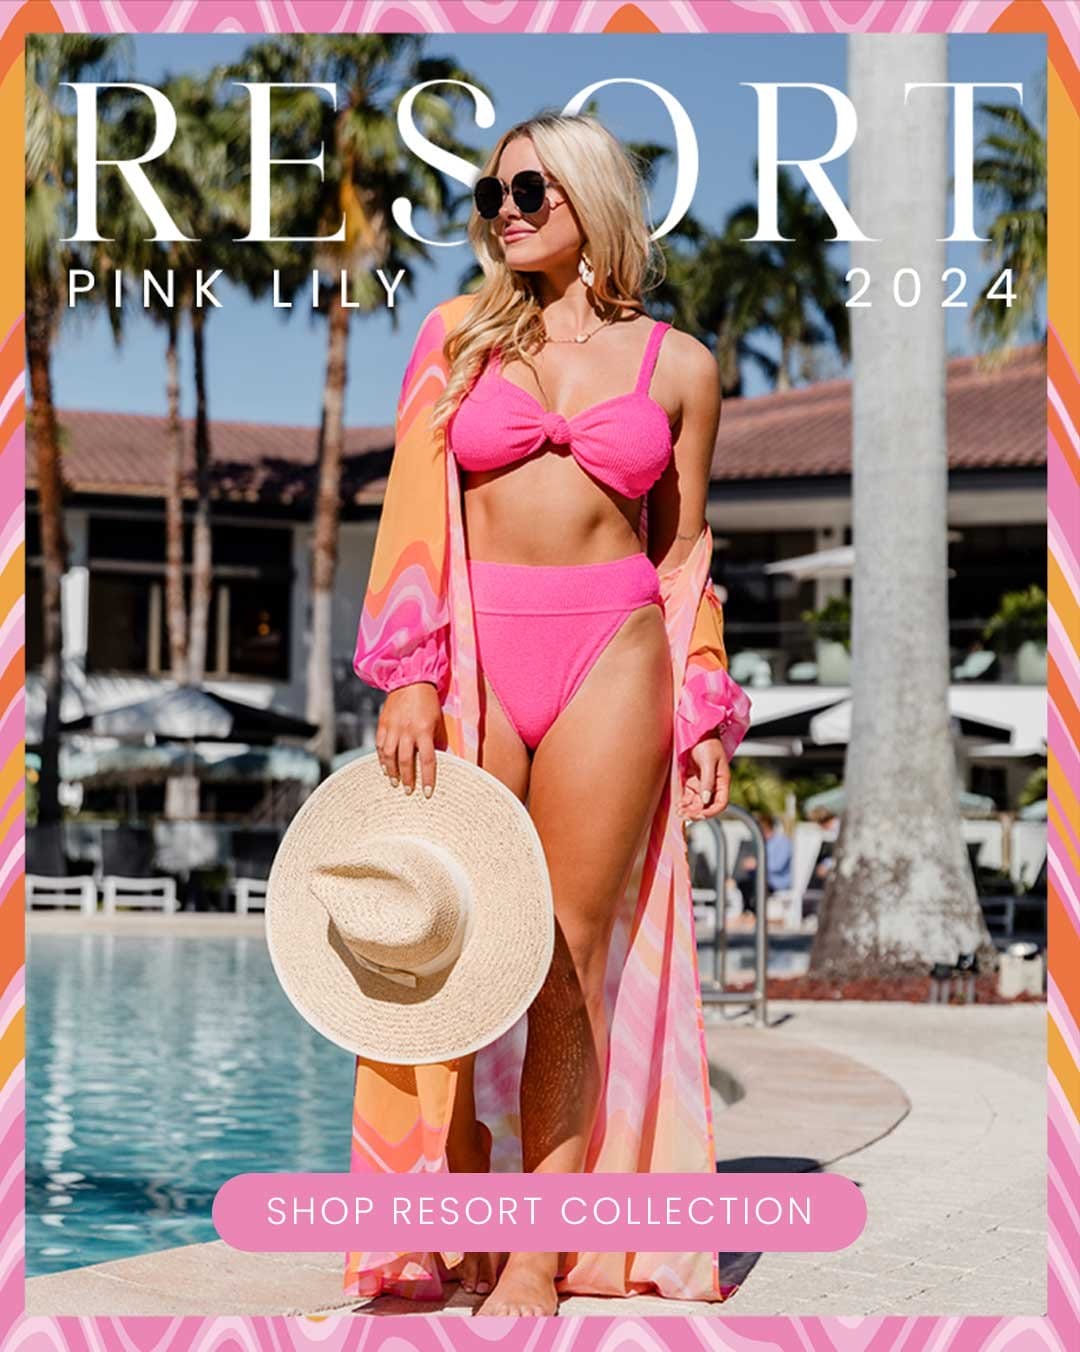 https://pinklily.com/collections/resort-ready-style/?clicklocation=PerksEA